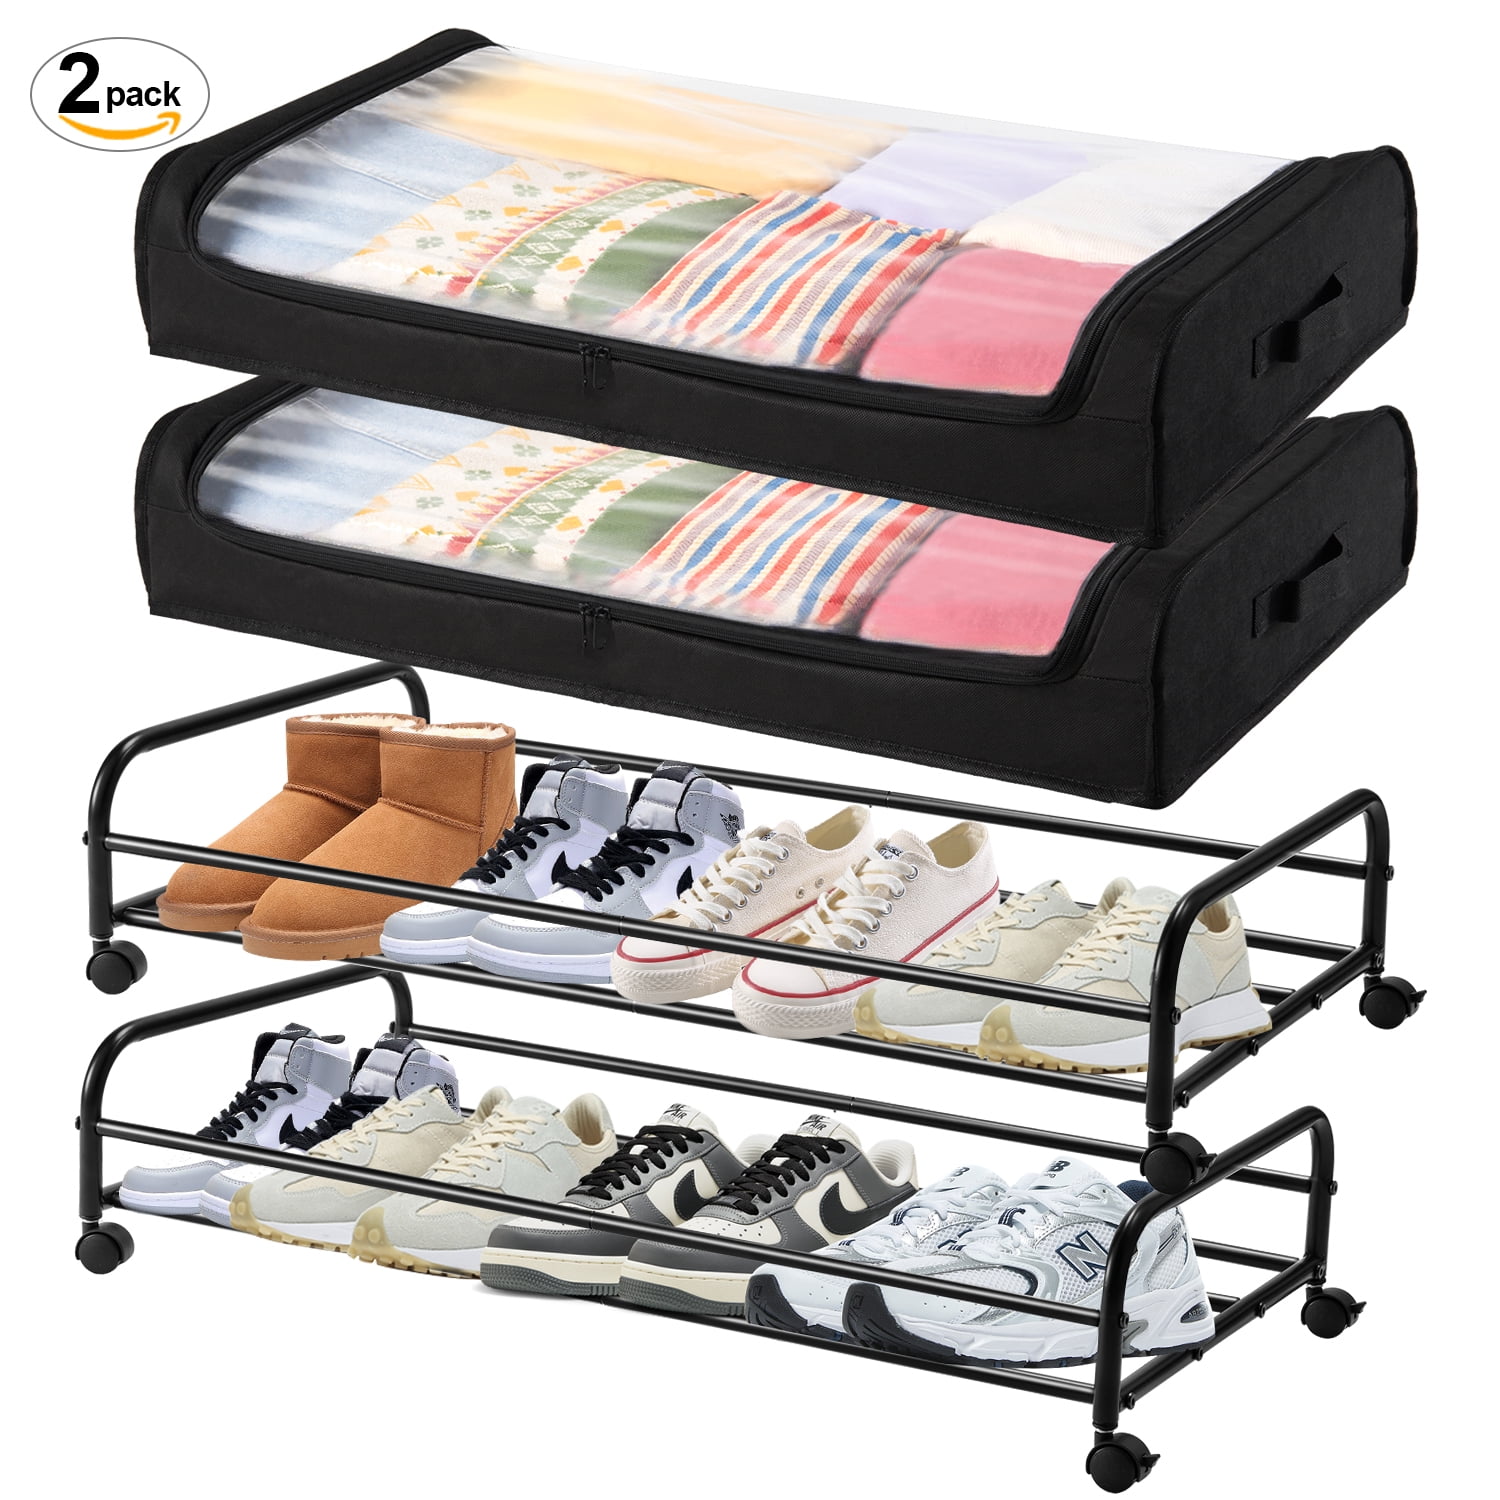 Under Bed Storage Containers, Under Bed Shoe Storage With Wheels, Bedroom Storage Organization with Handles, Under Bed Storage Bins Drawer For Clothes, Blankets And Shoes, Bedding-Black